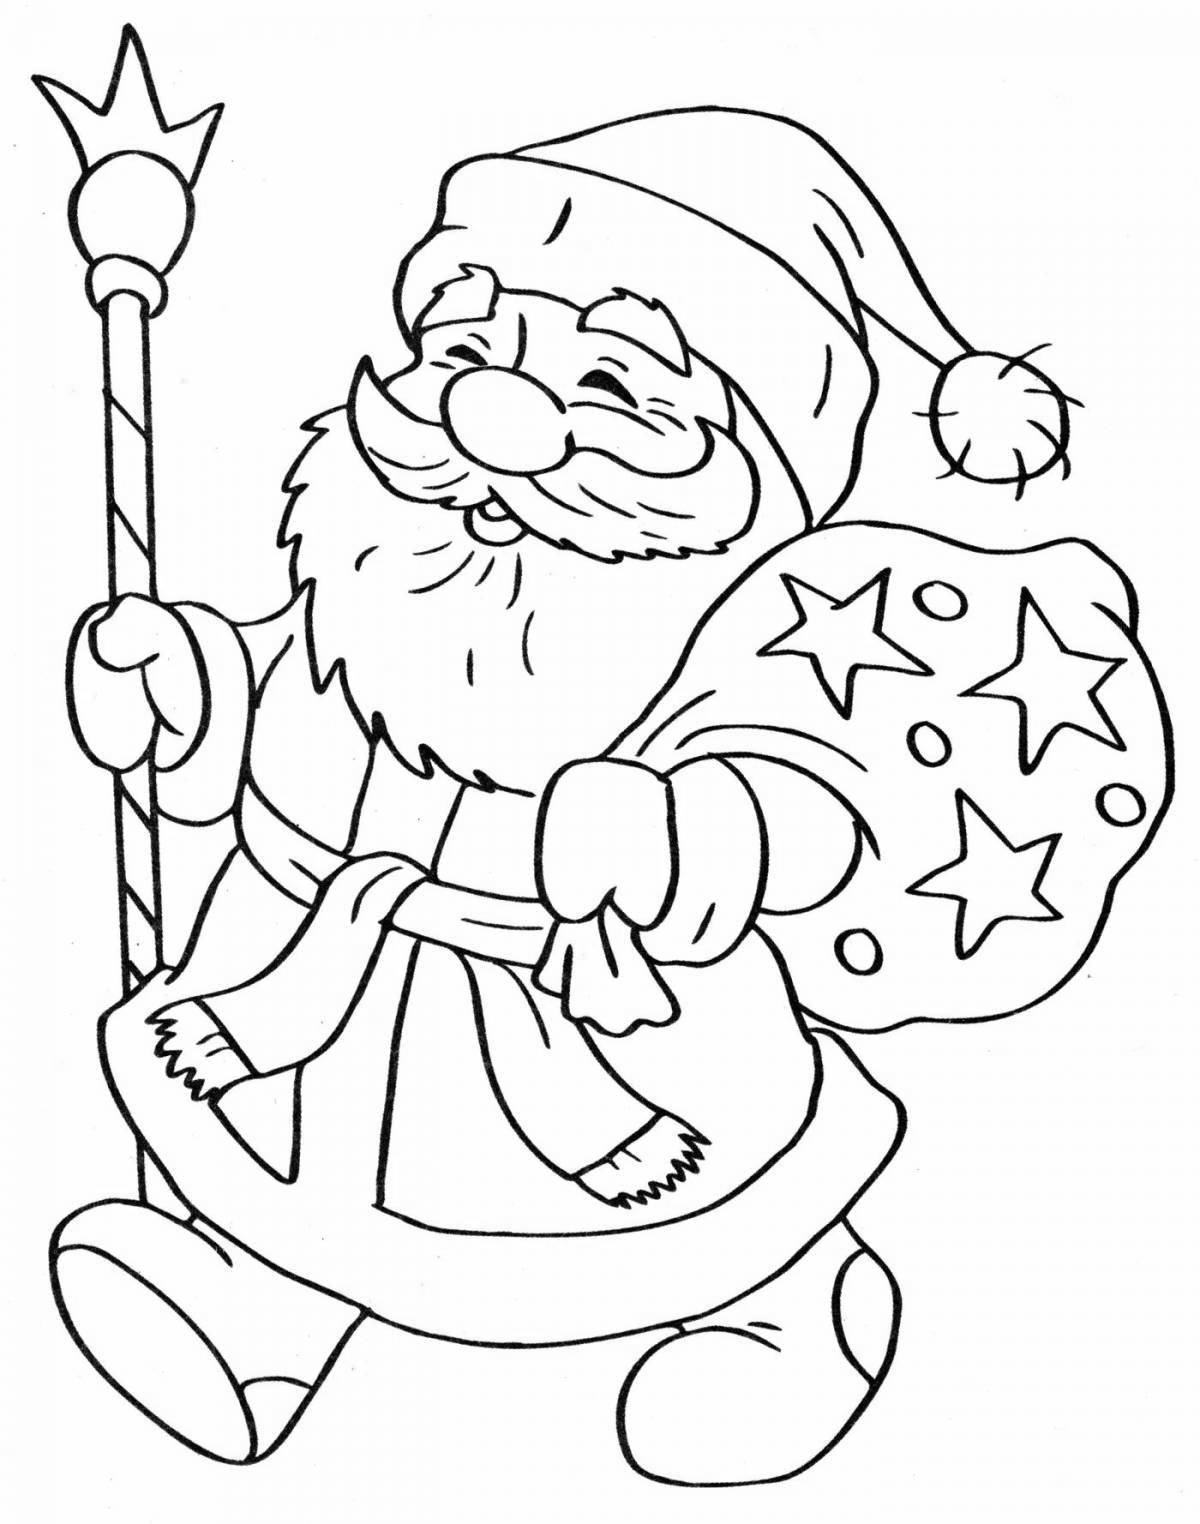 Magic frost coloring book for kids